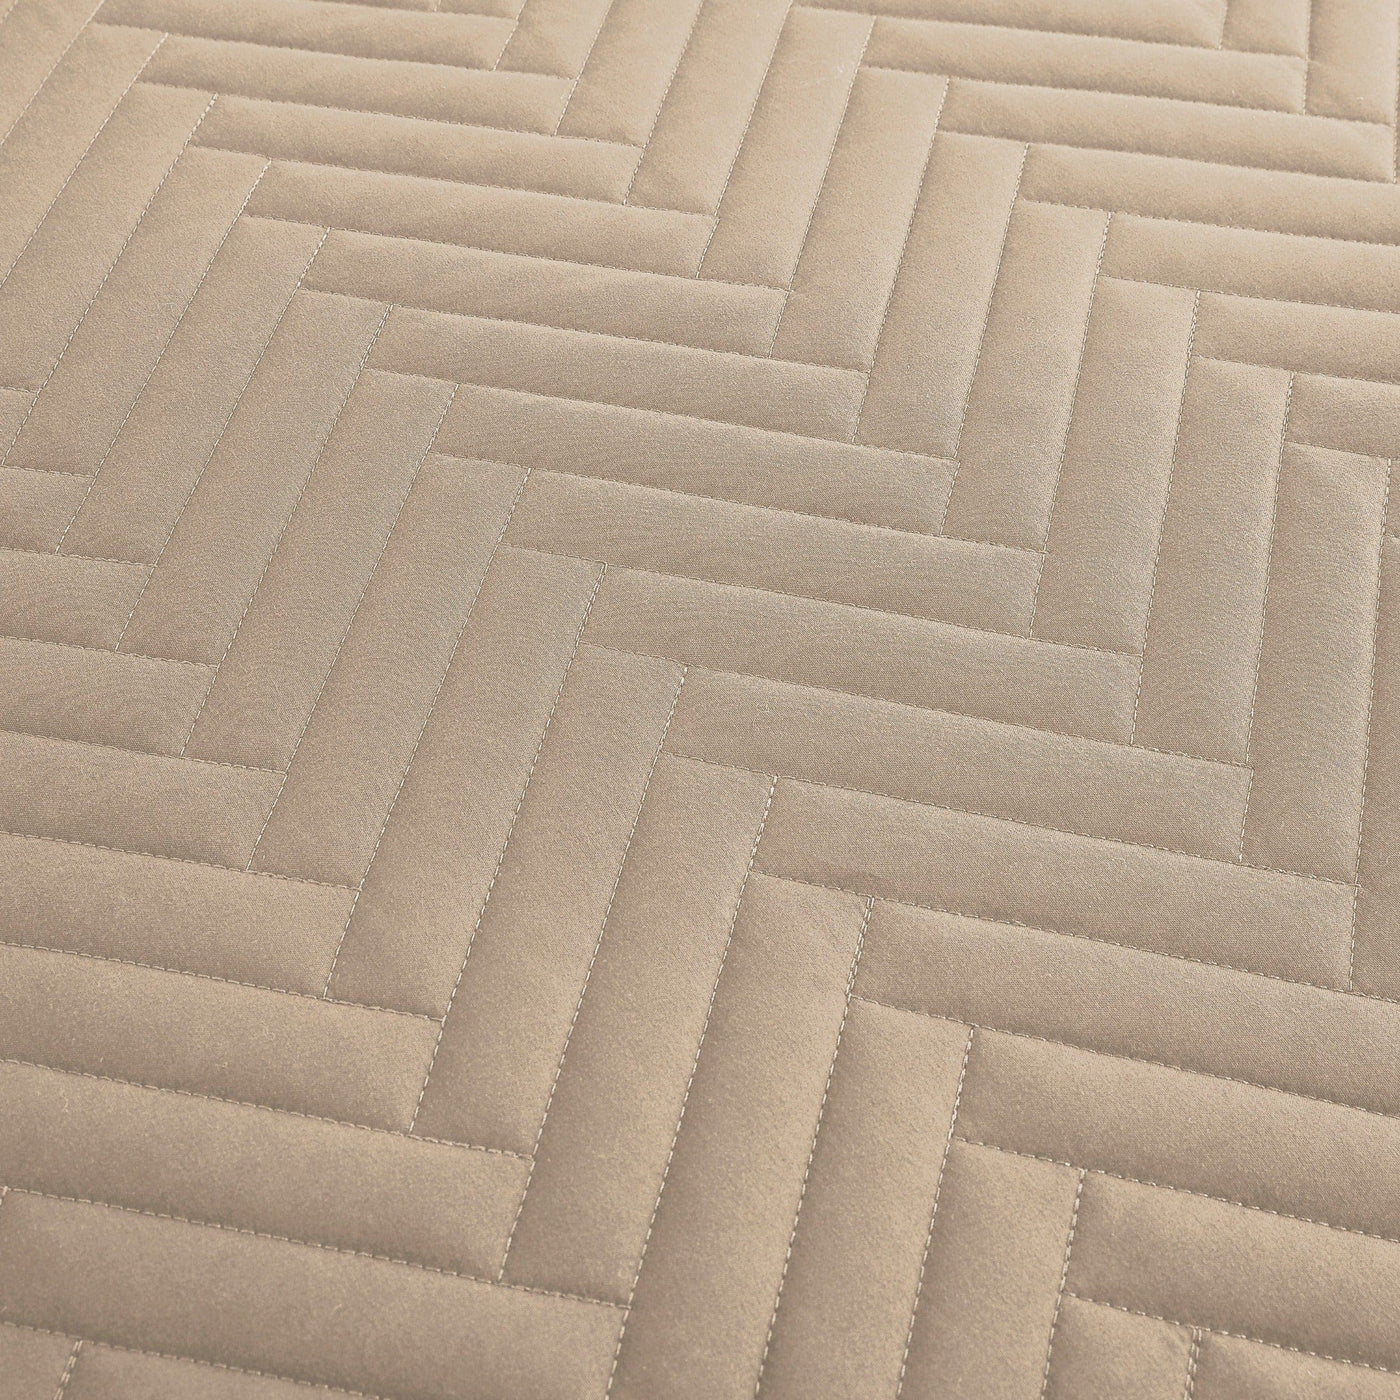 Details and Patterns of Chevron Oversized Quilt Set in Sandy Taupe#color_chevron-sandy-taupe